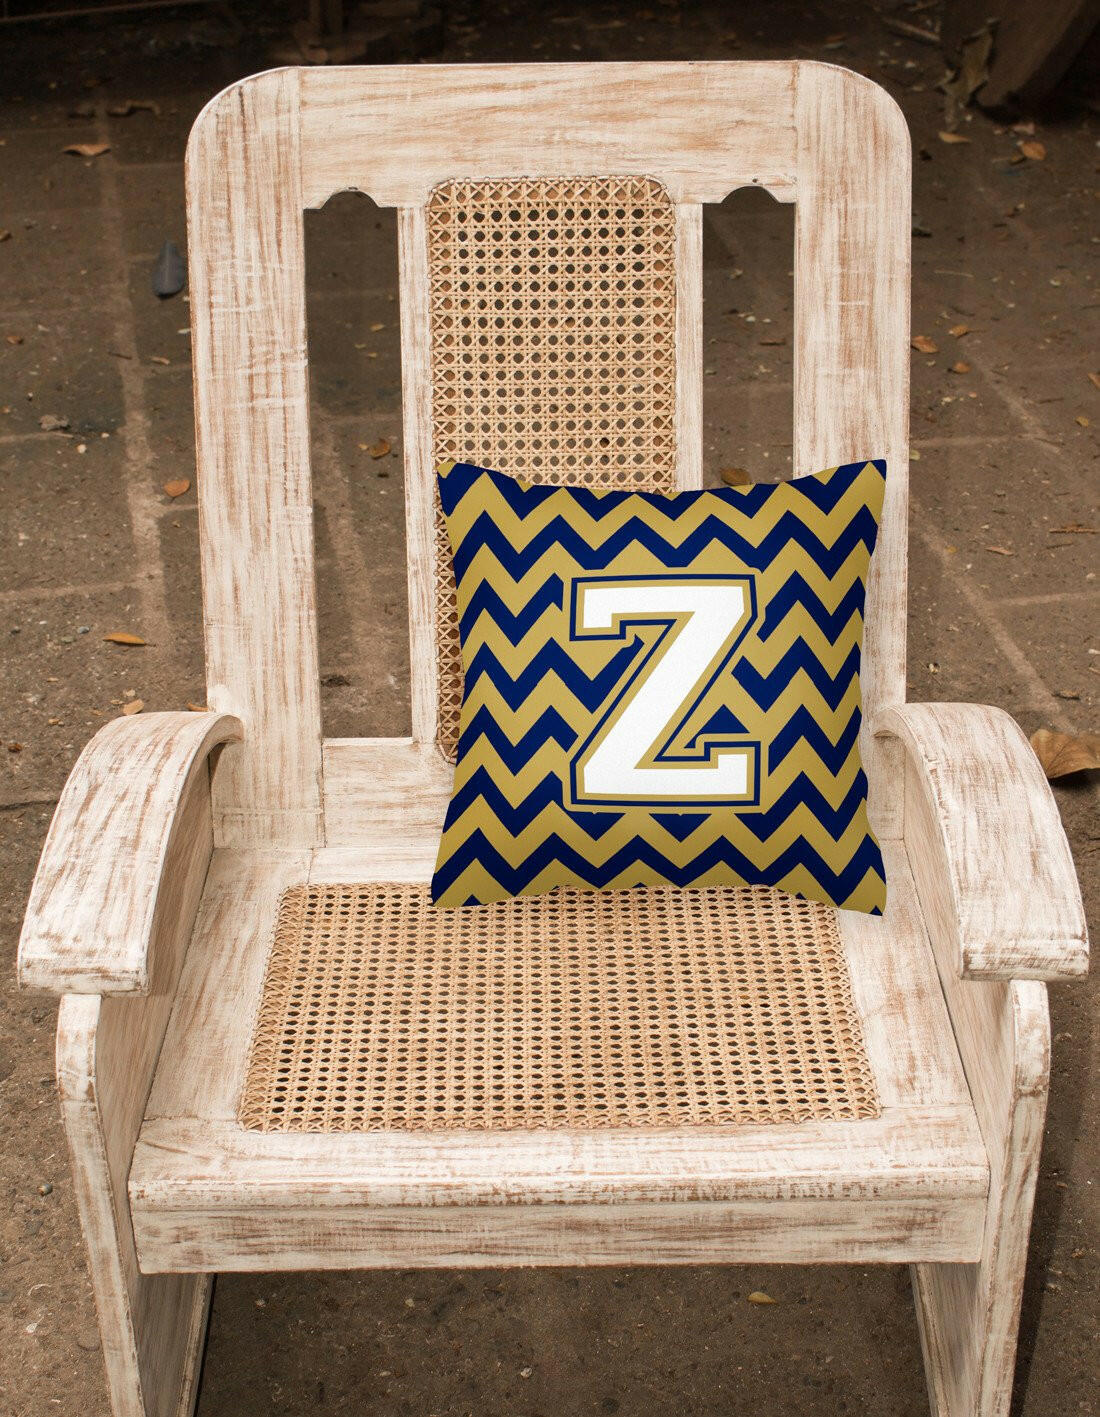 Letter Z Chevron Navy Blue and Gold Fabric Decorative Pillow CJ1057-ZPW1414 by Caroline's Treasures